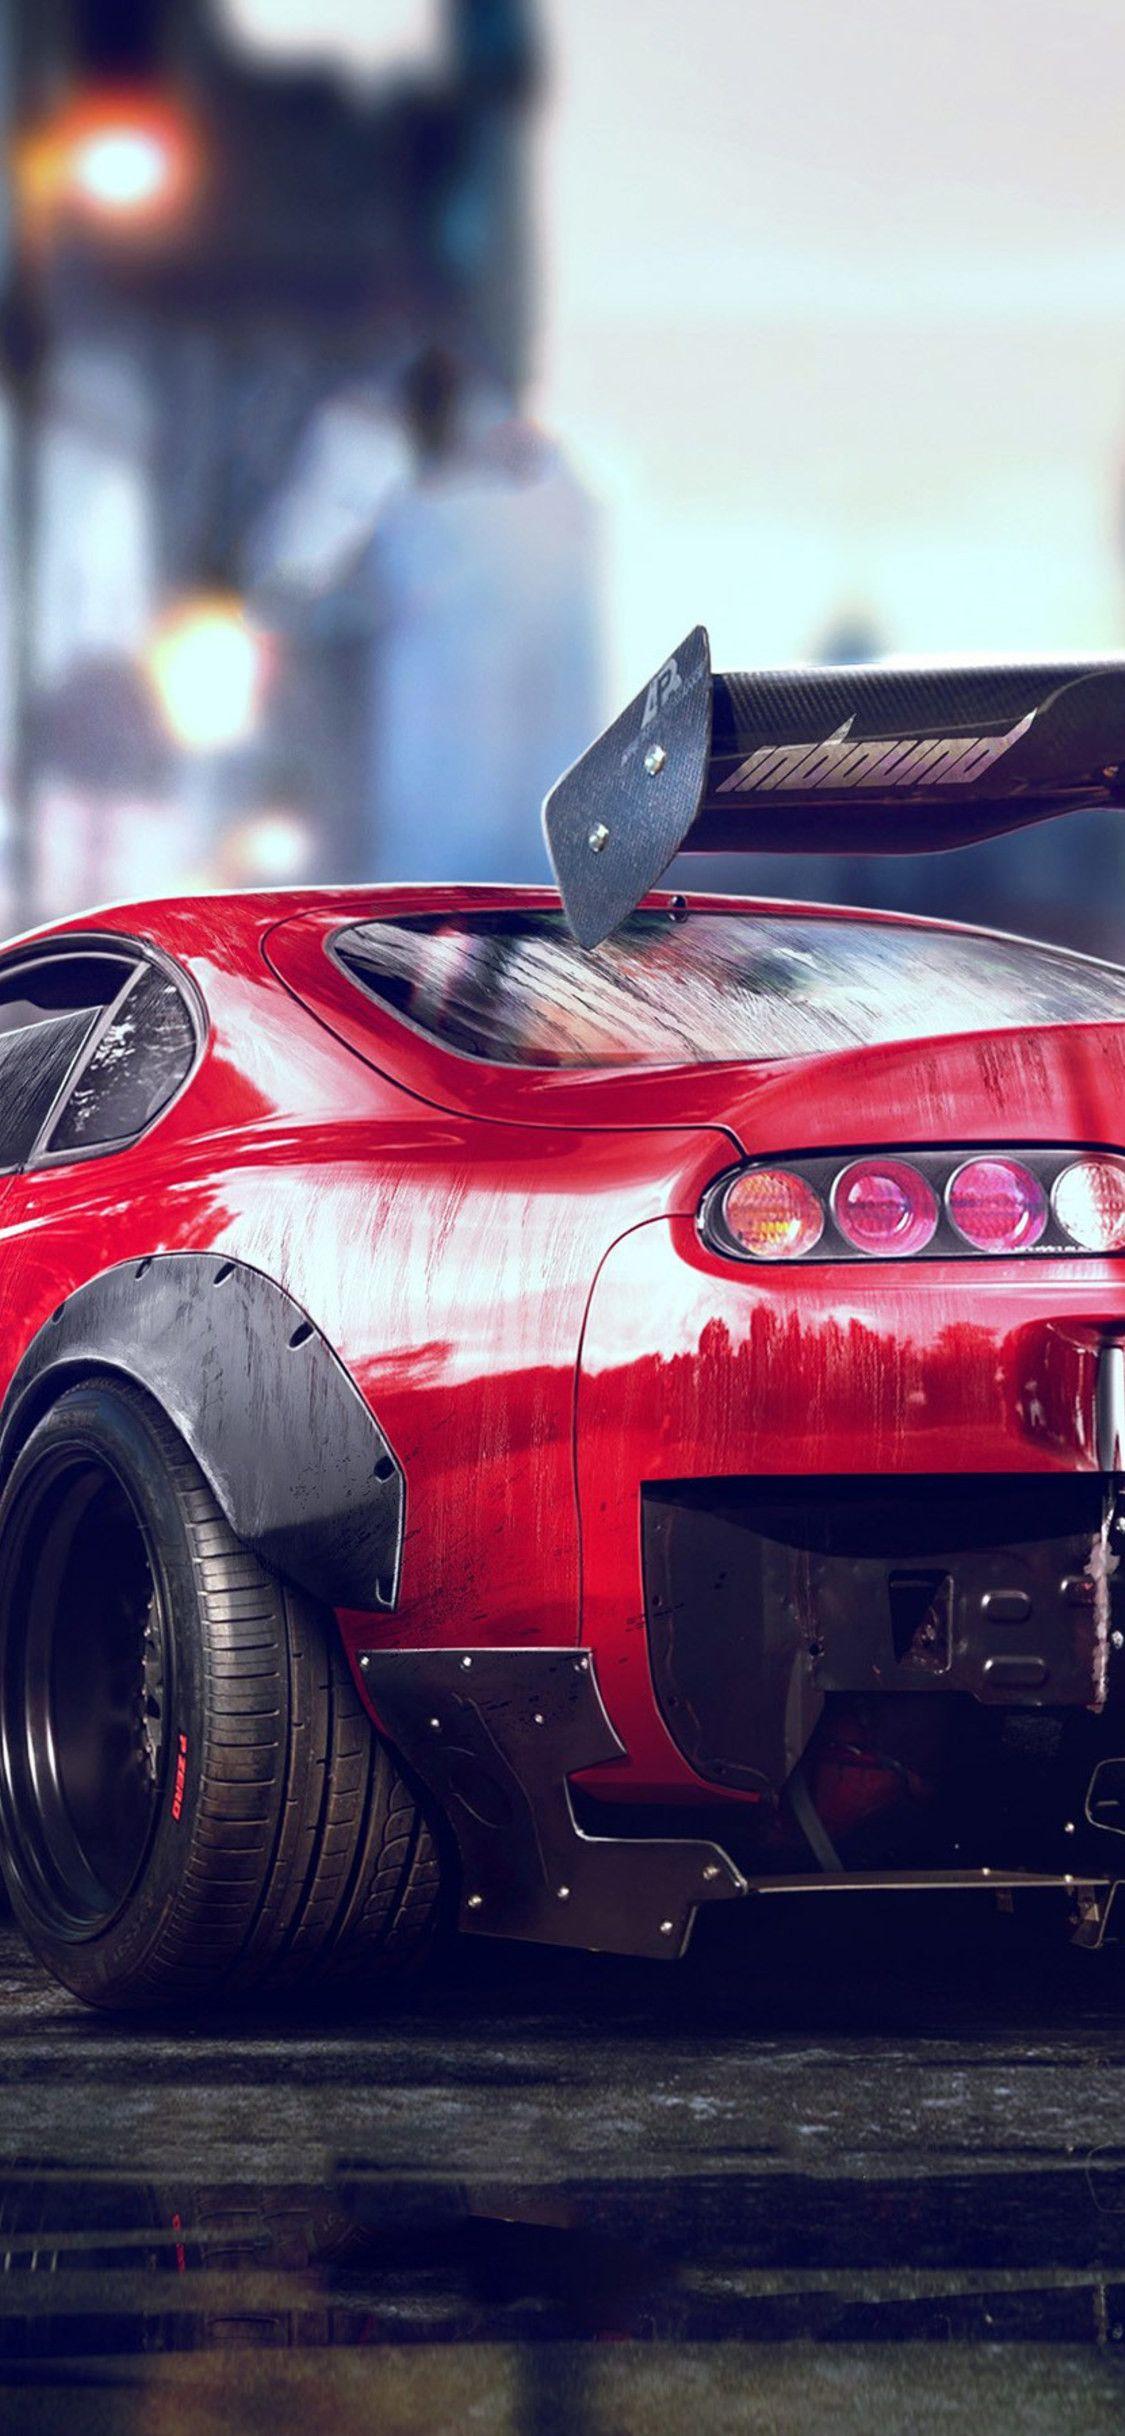 Discover 95+ about toyota supra wallpaper iphone best .vn